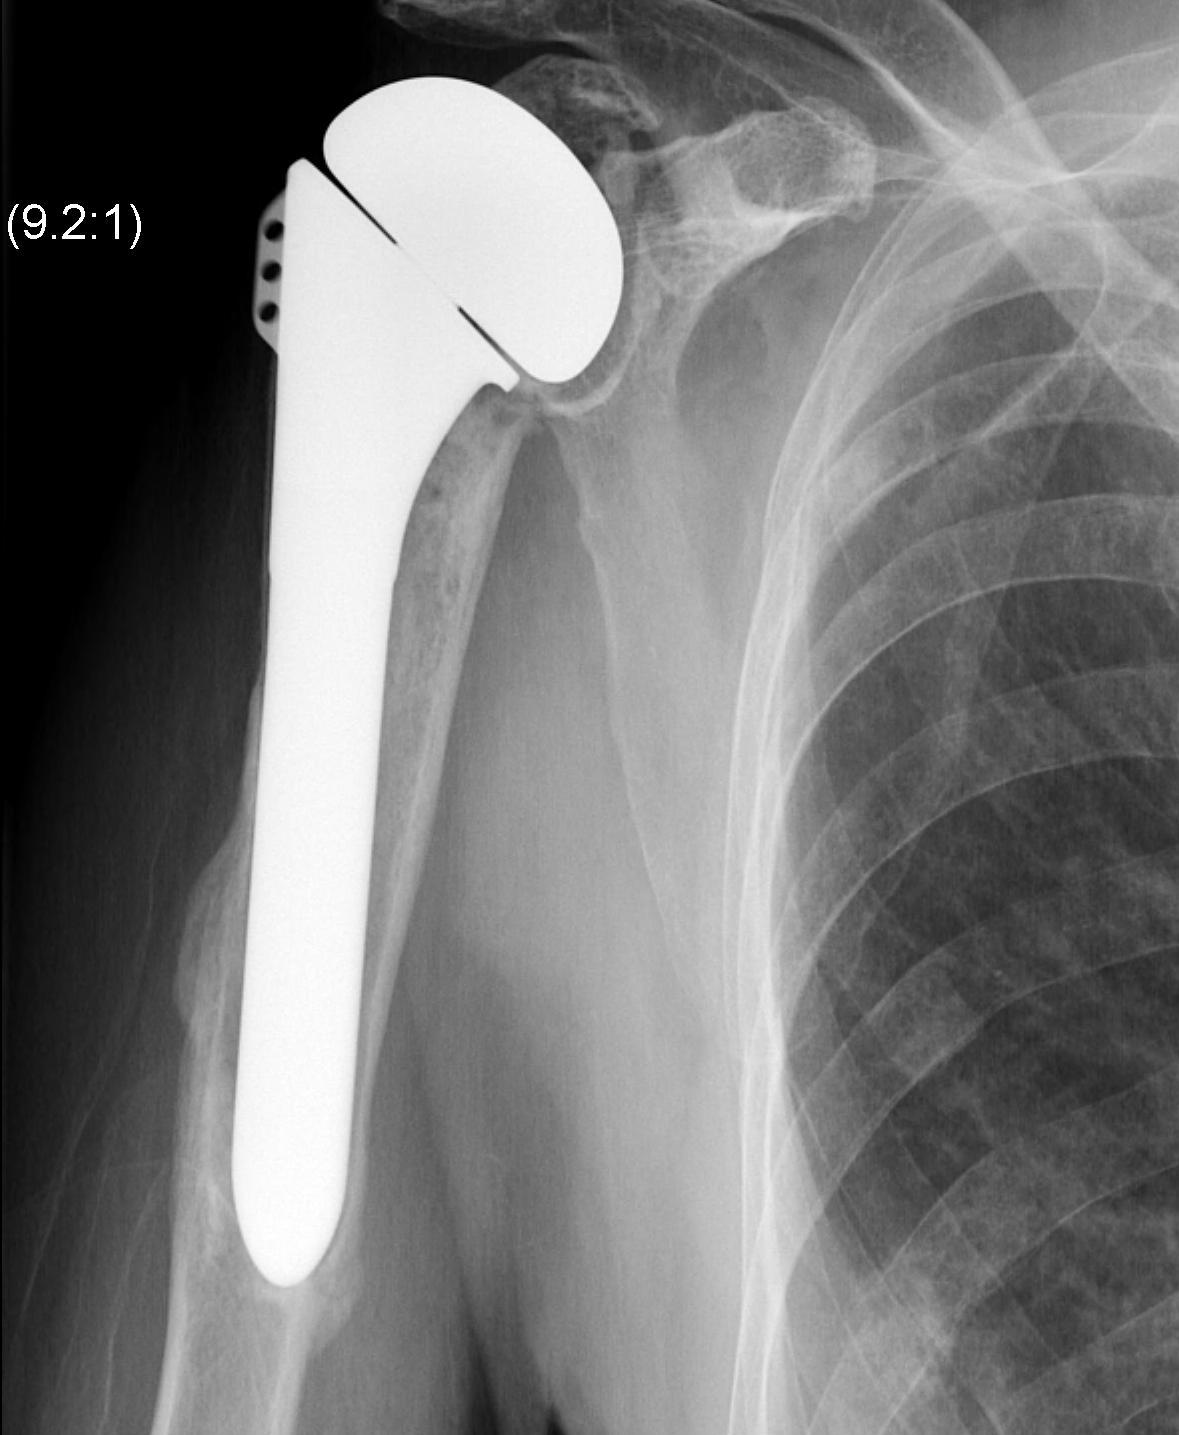 TSR Humeral Fracture United